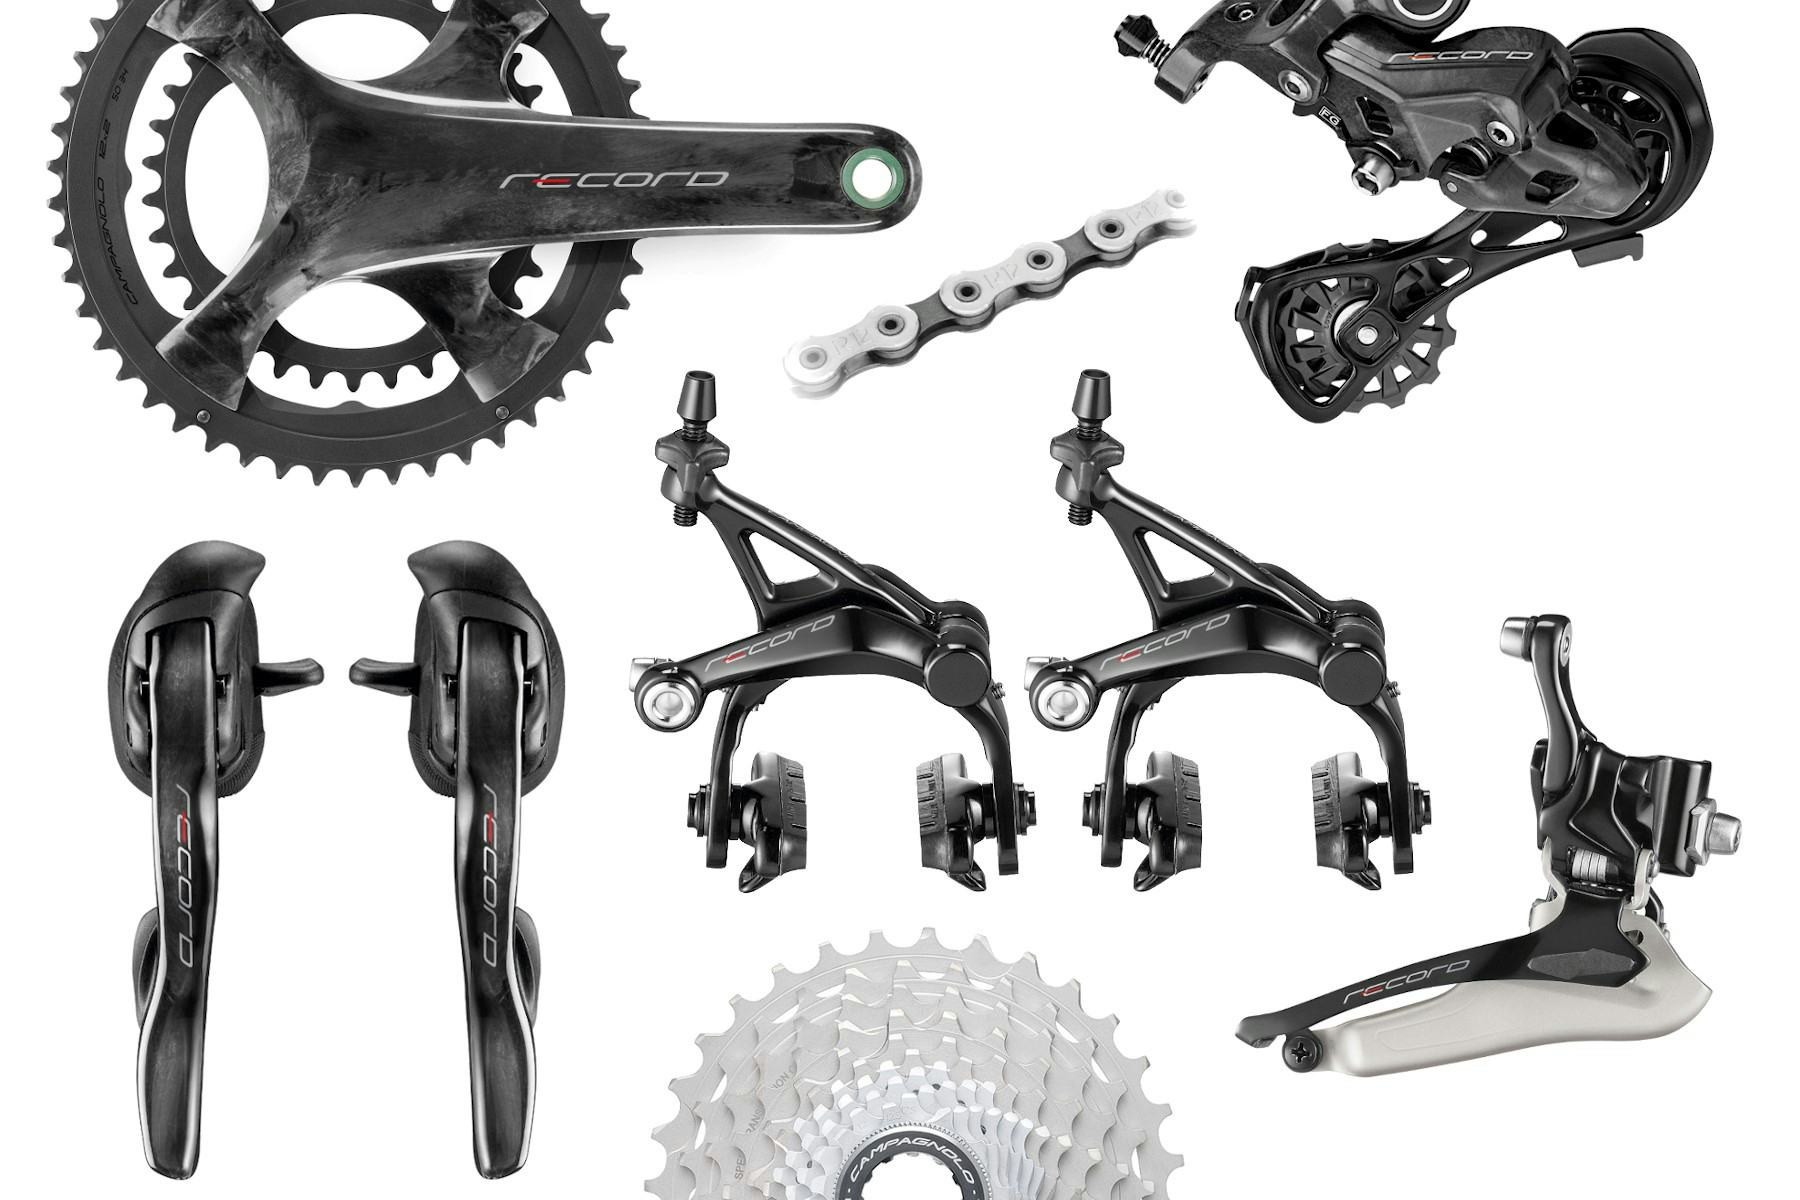 Pinkjersey.com, the online retailer known for selling Campagnolo groupsets, has ambitious US plans. – Photo Campagnolo  